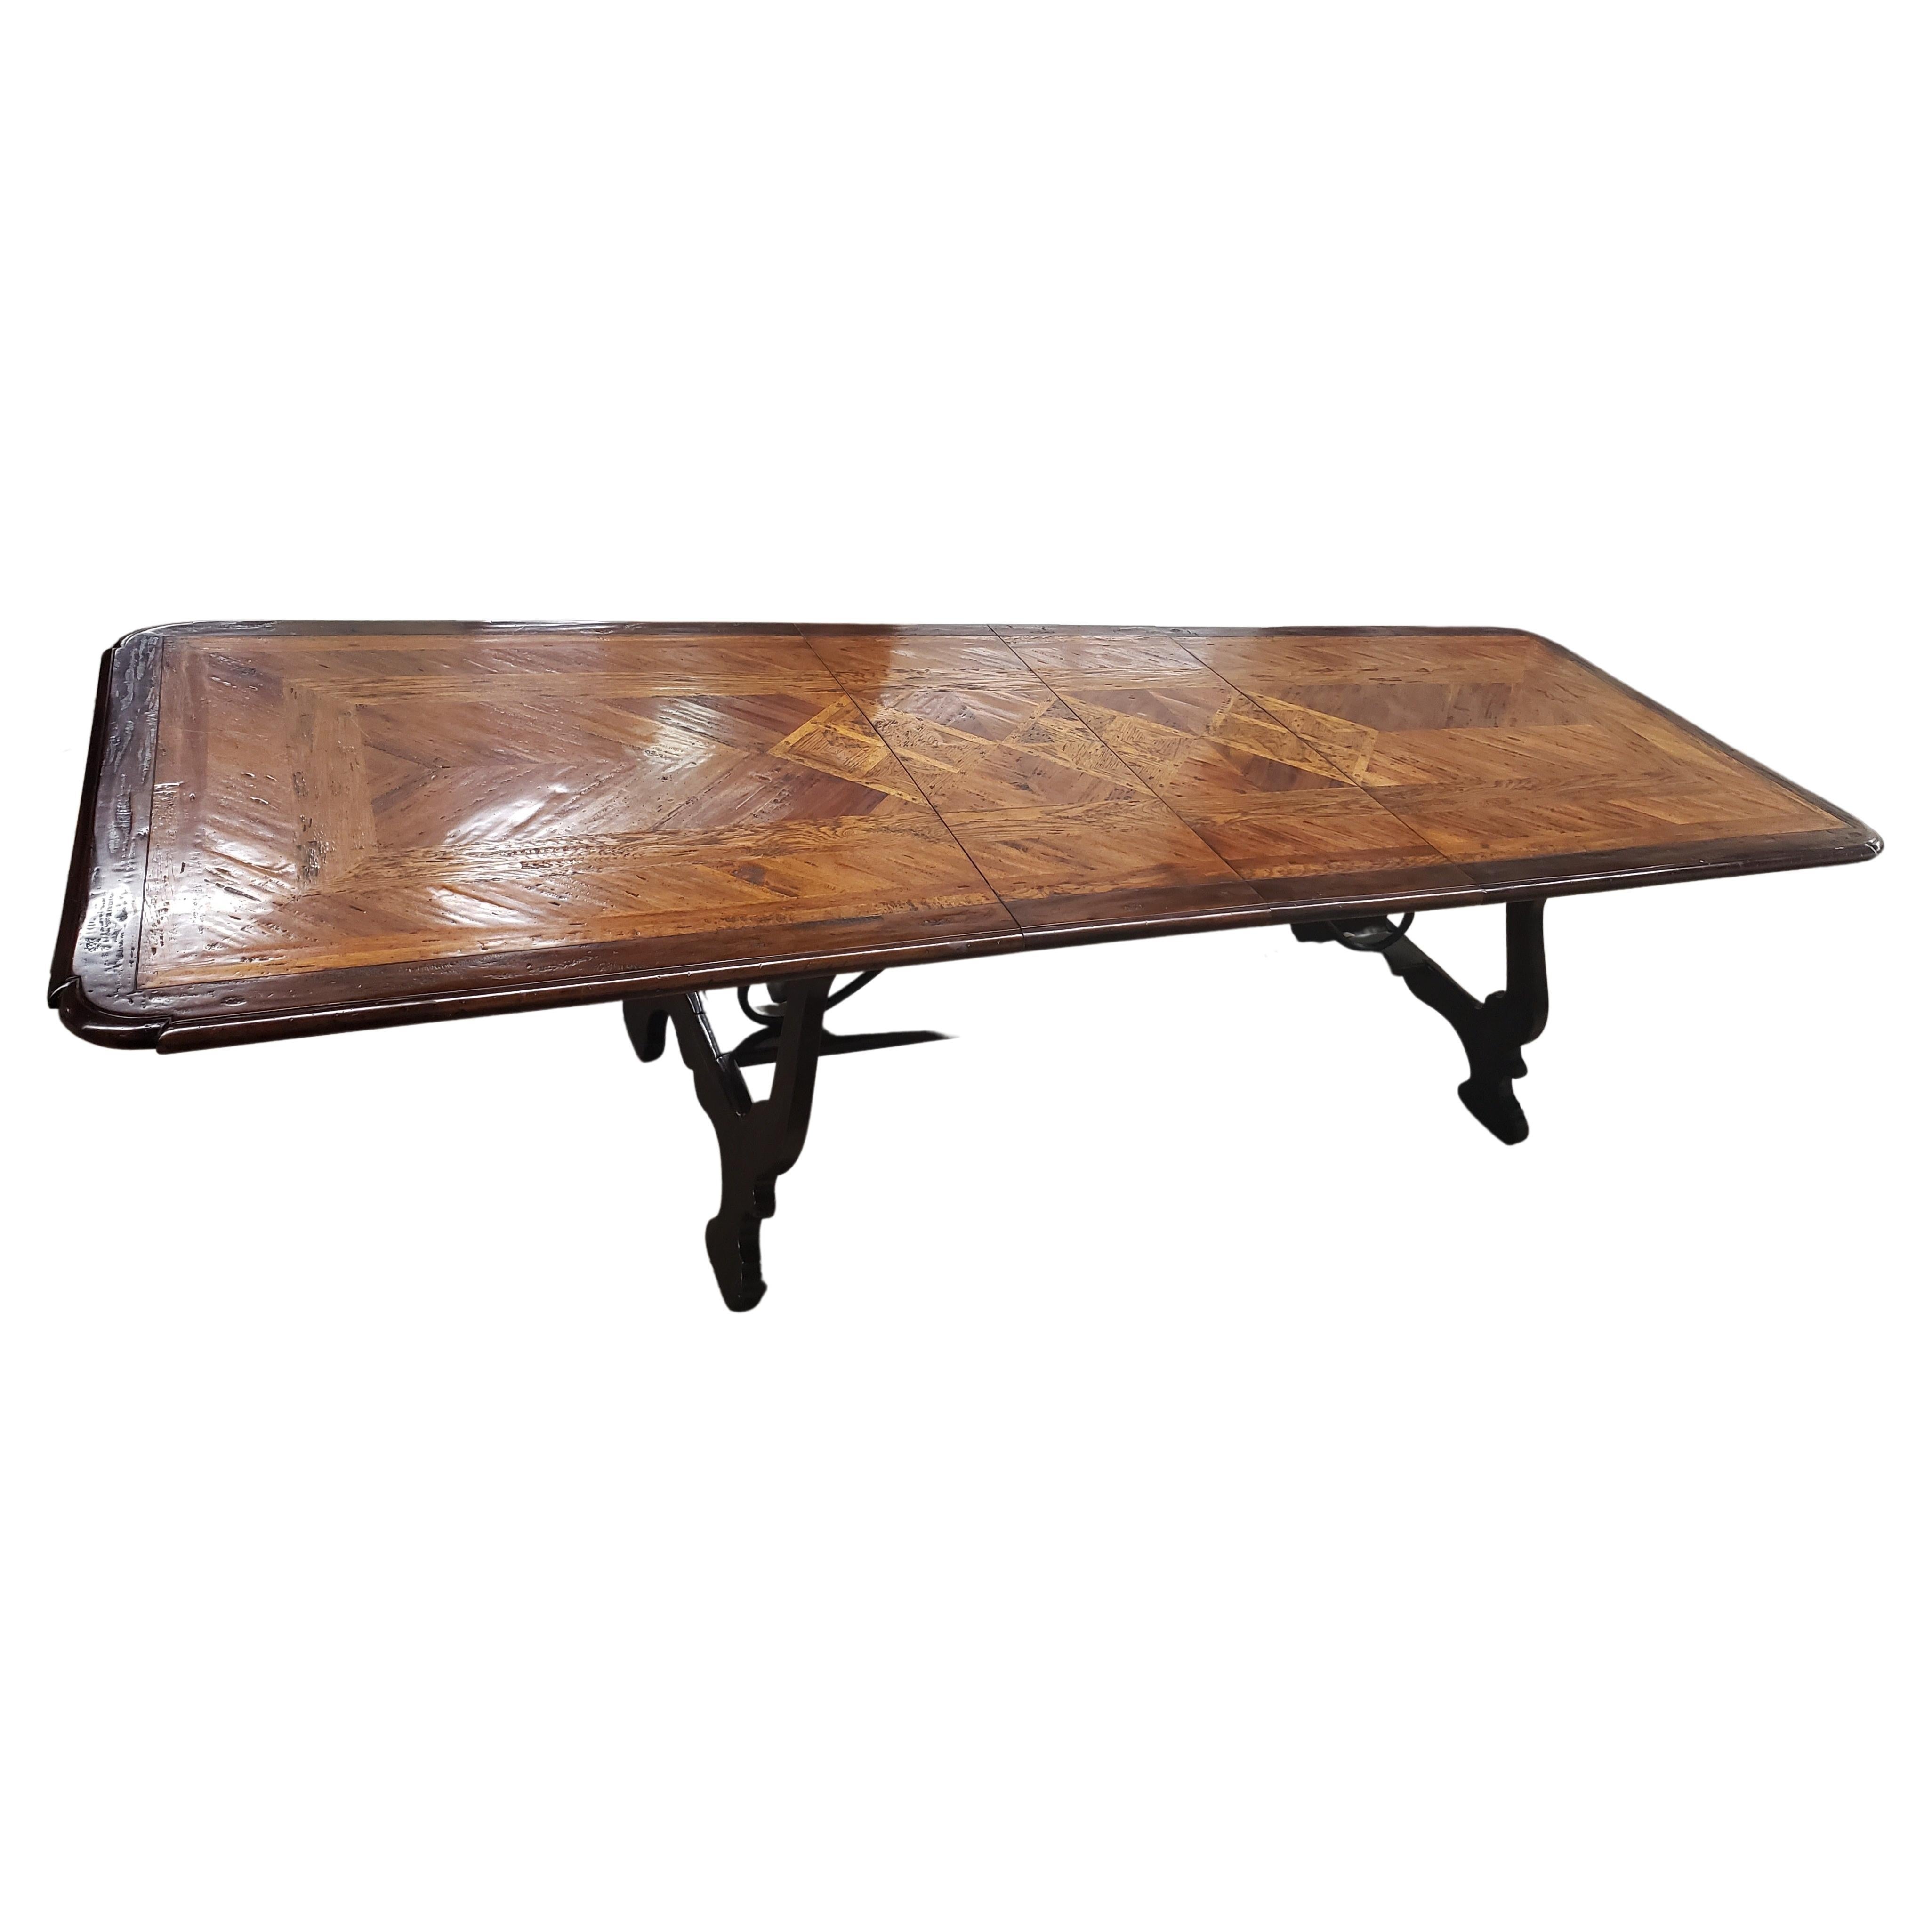 Dennis & Leen Baroque Style Walnut Oak Mahogany Parquetry Trestle Dining Table  For Sale 2